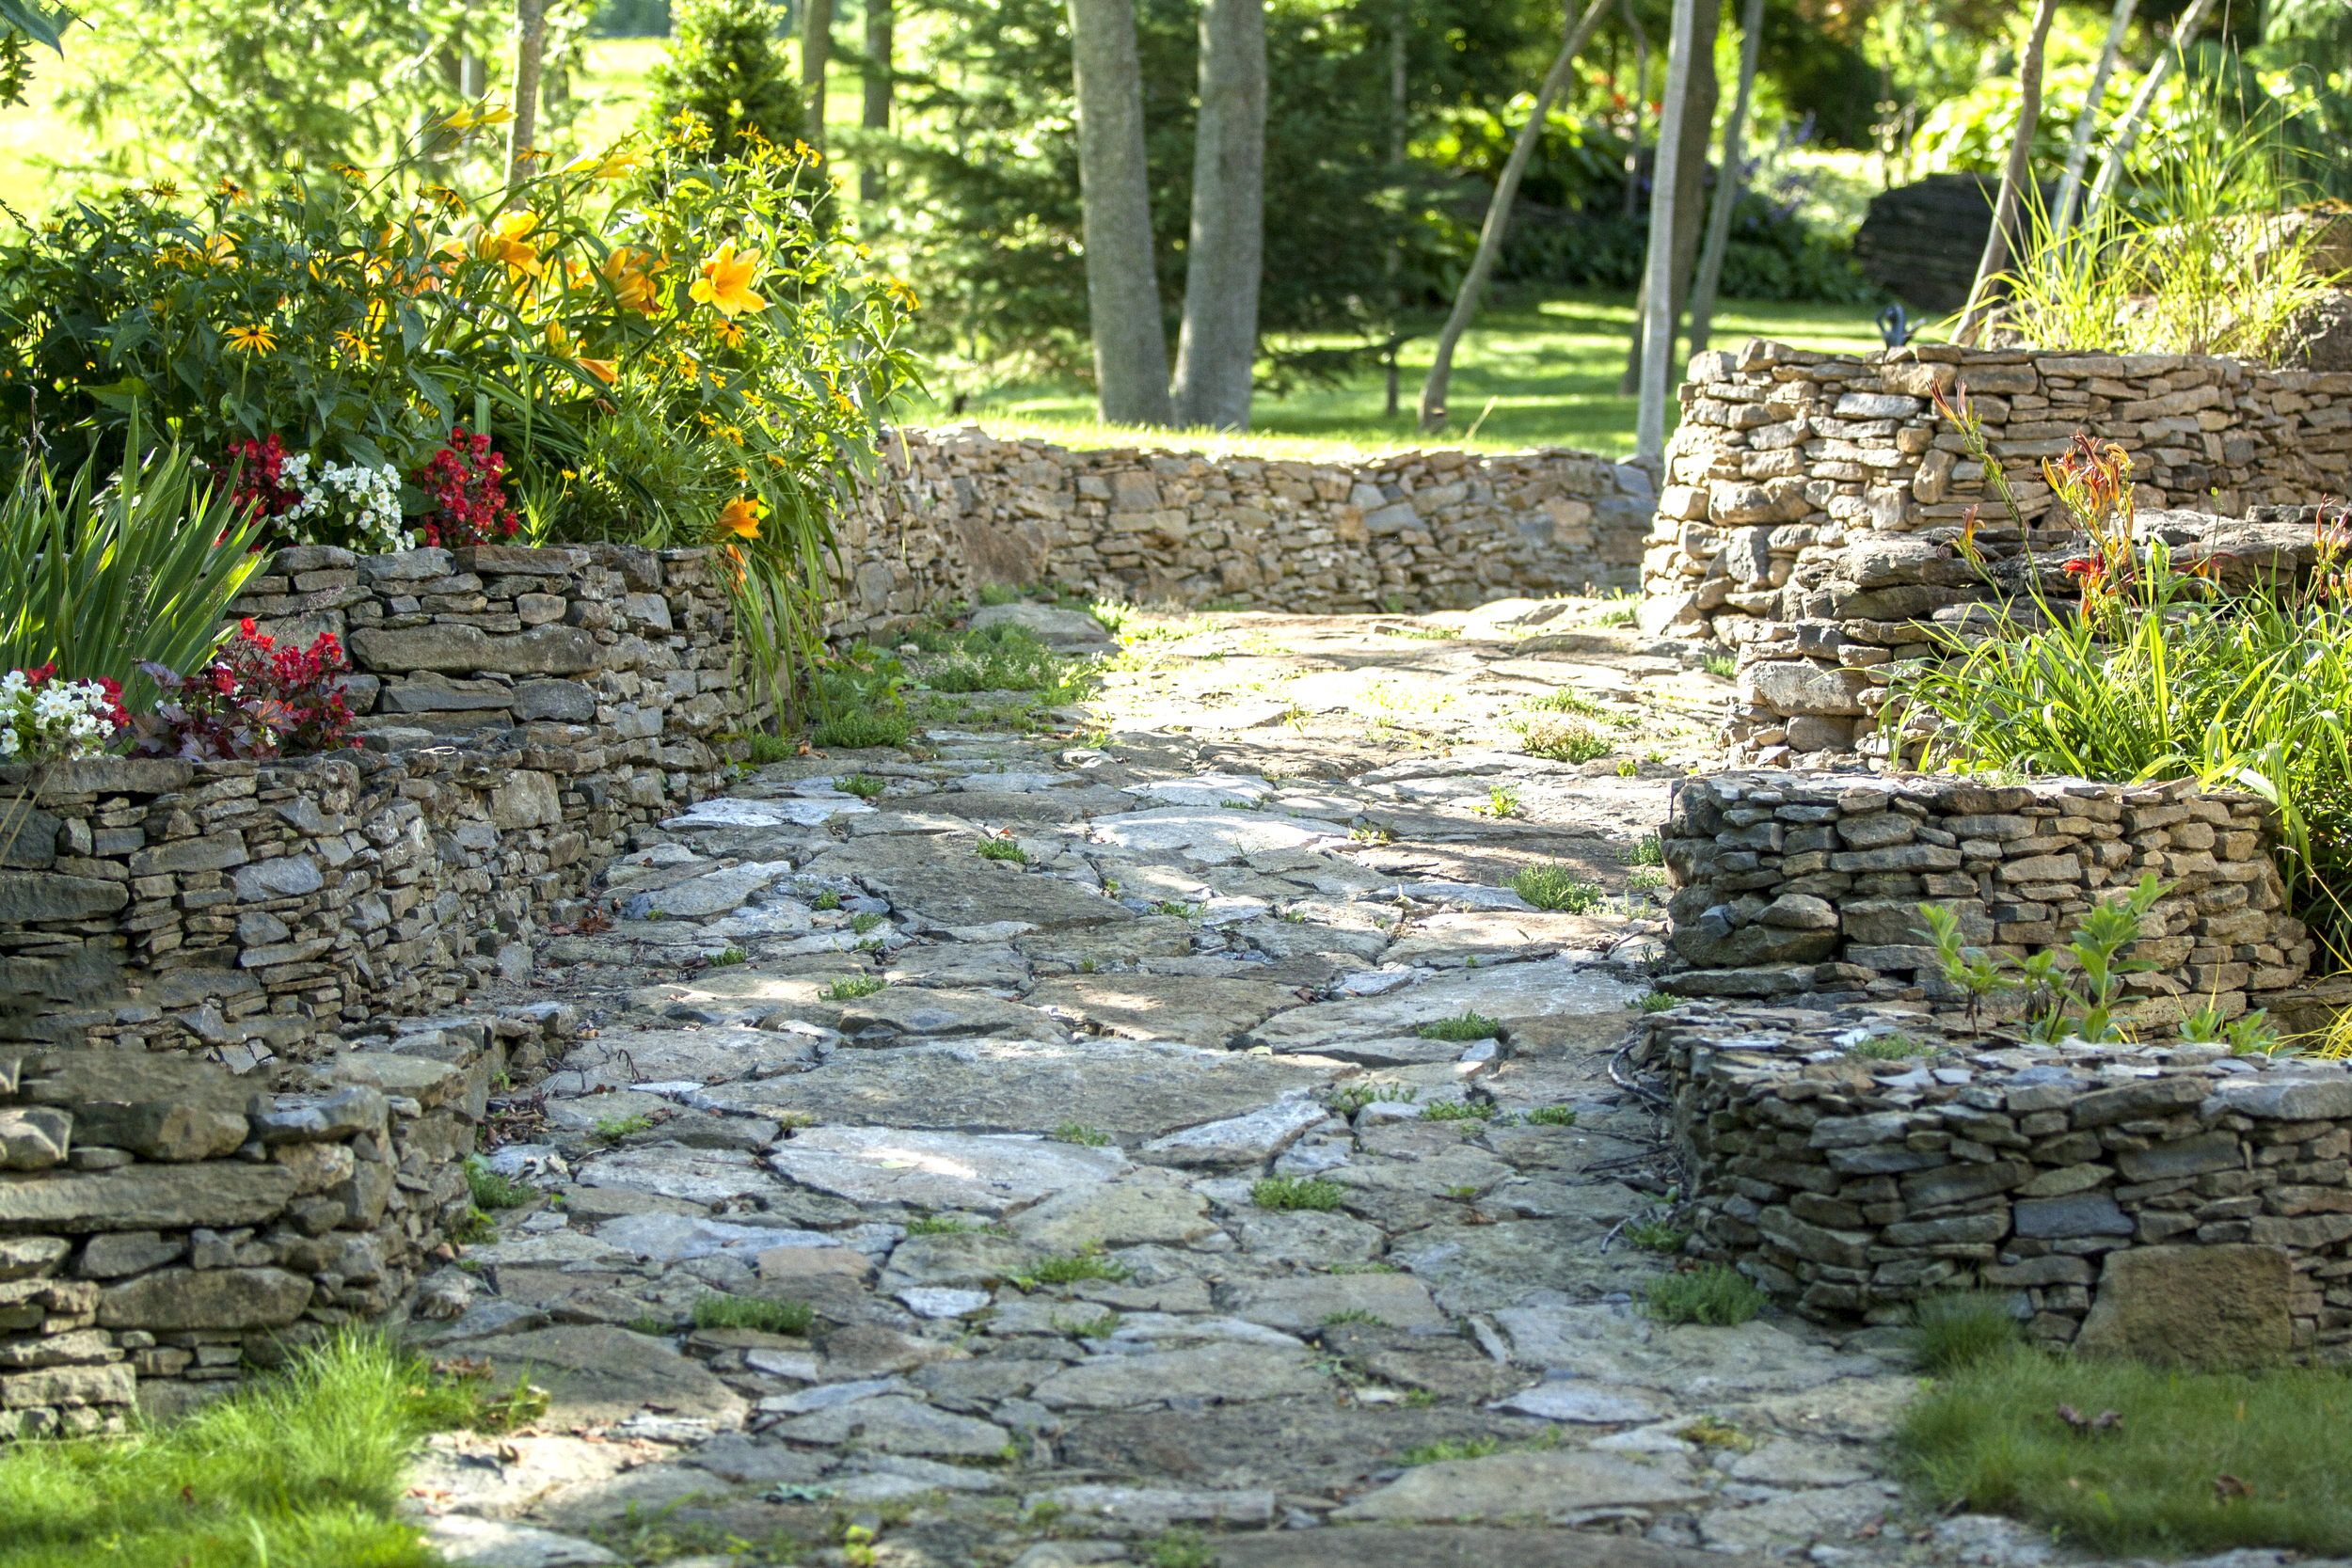 Landscape Design | Landscaping | Terrace Gardens | Dry Lay Stone Path | Waterfront Dream Home | Riverview Design Solutions | Prescott, Ontario, Canada